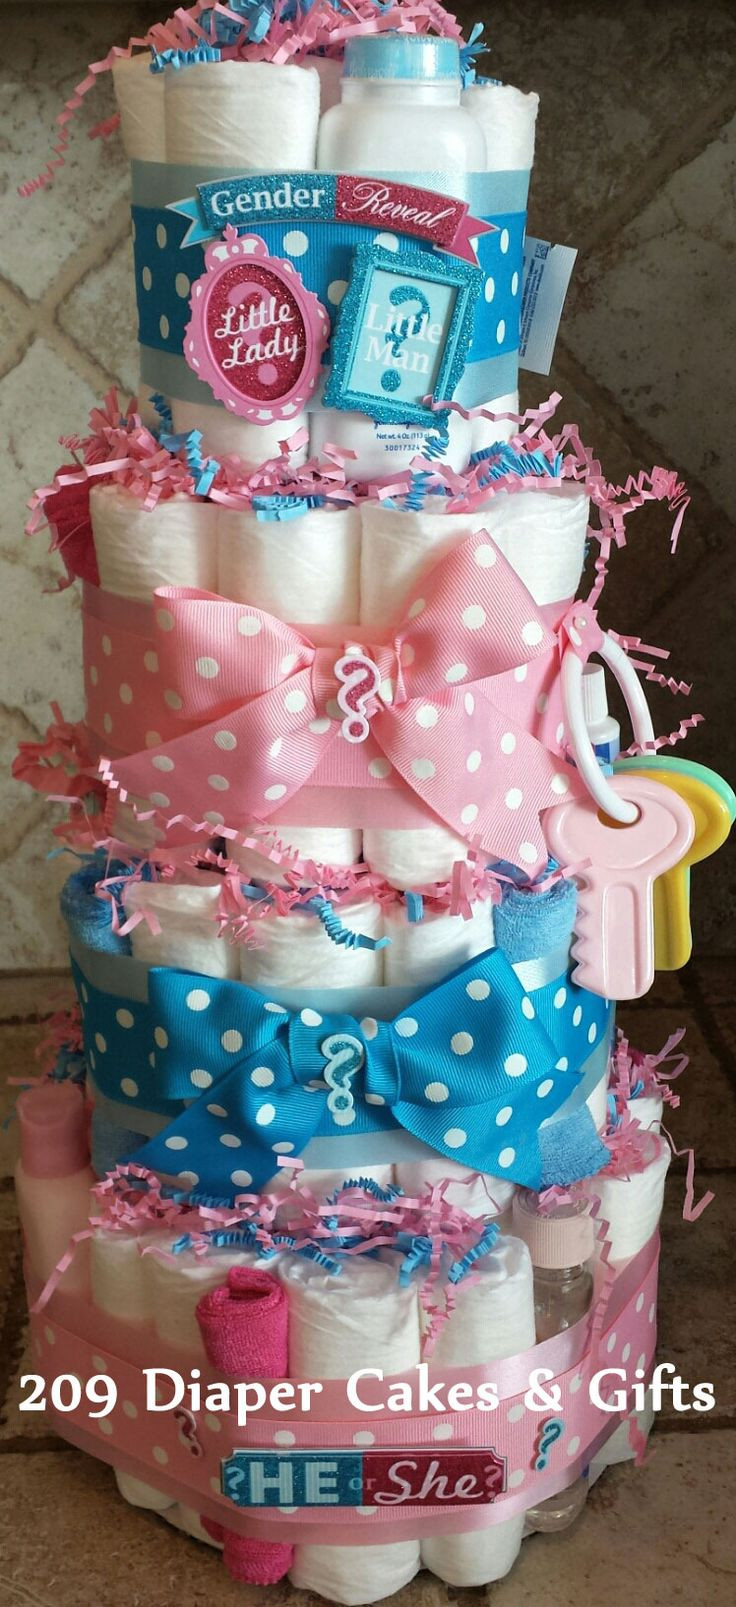 Gift Ideas For Gender Reveal Party
 4 Tier Pink & Blue Gender Reveal Diaper Cake by 209 Diaper